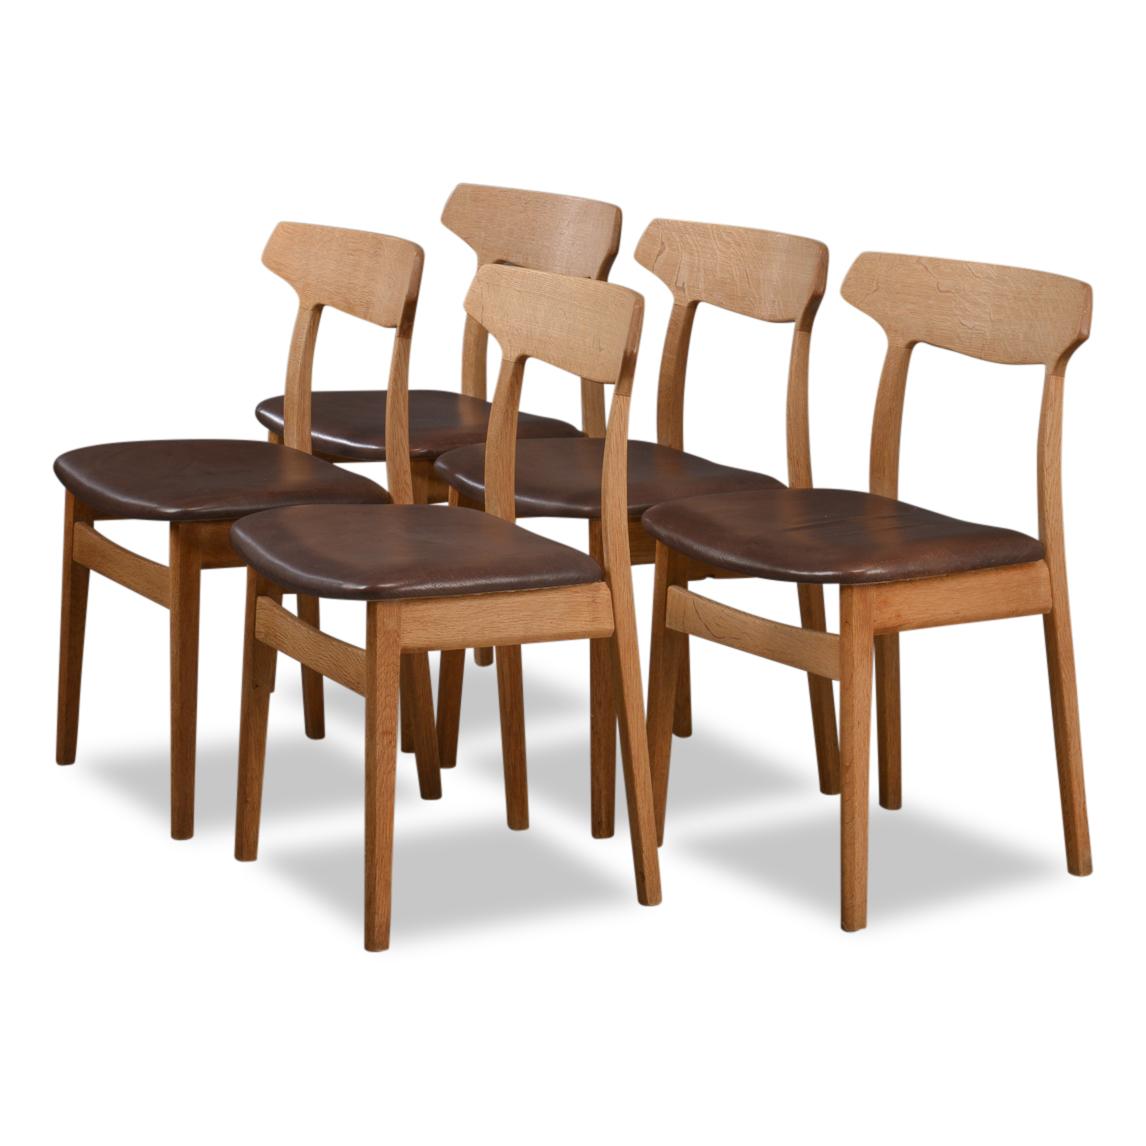 Set of five vintage dining chairs designed by Henning Kjaernulf voor Bruno Hansen. Stylish Mid-Century Modern top design that provides excellent seating comfort. The chairs feature a typically Danish organic design, solid oak frames and a dark brown